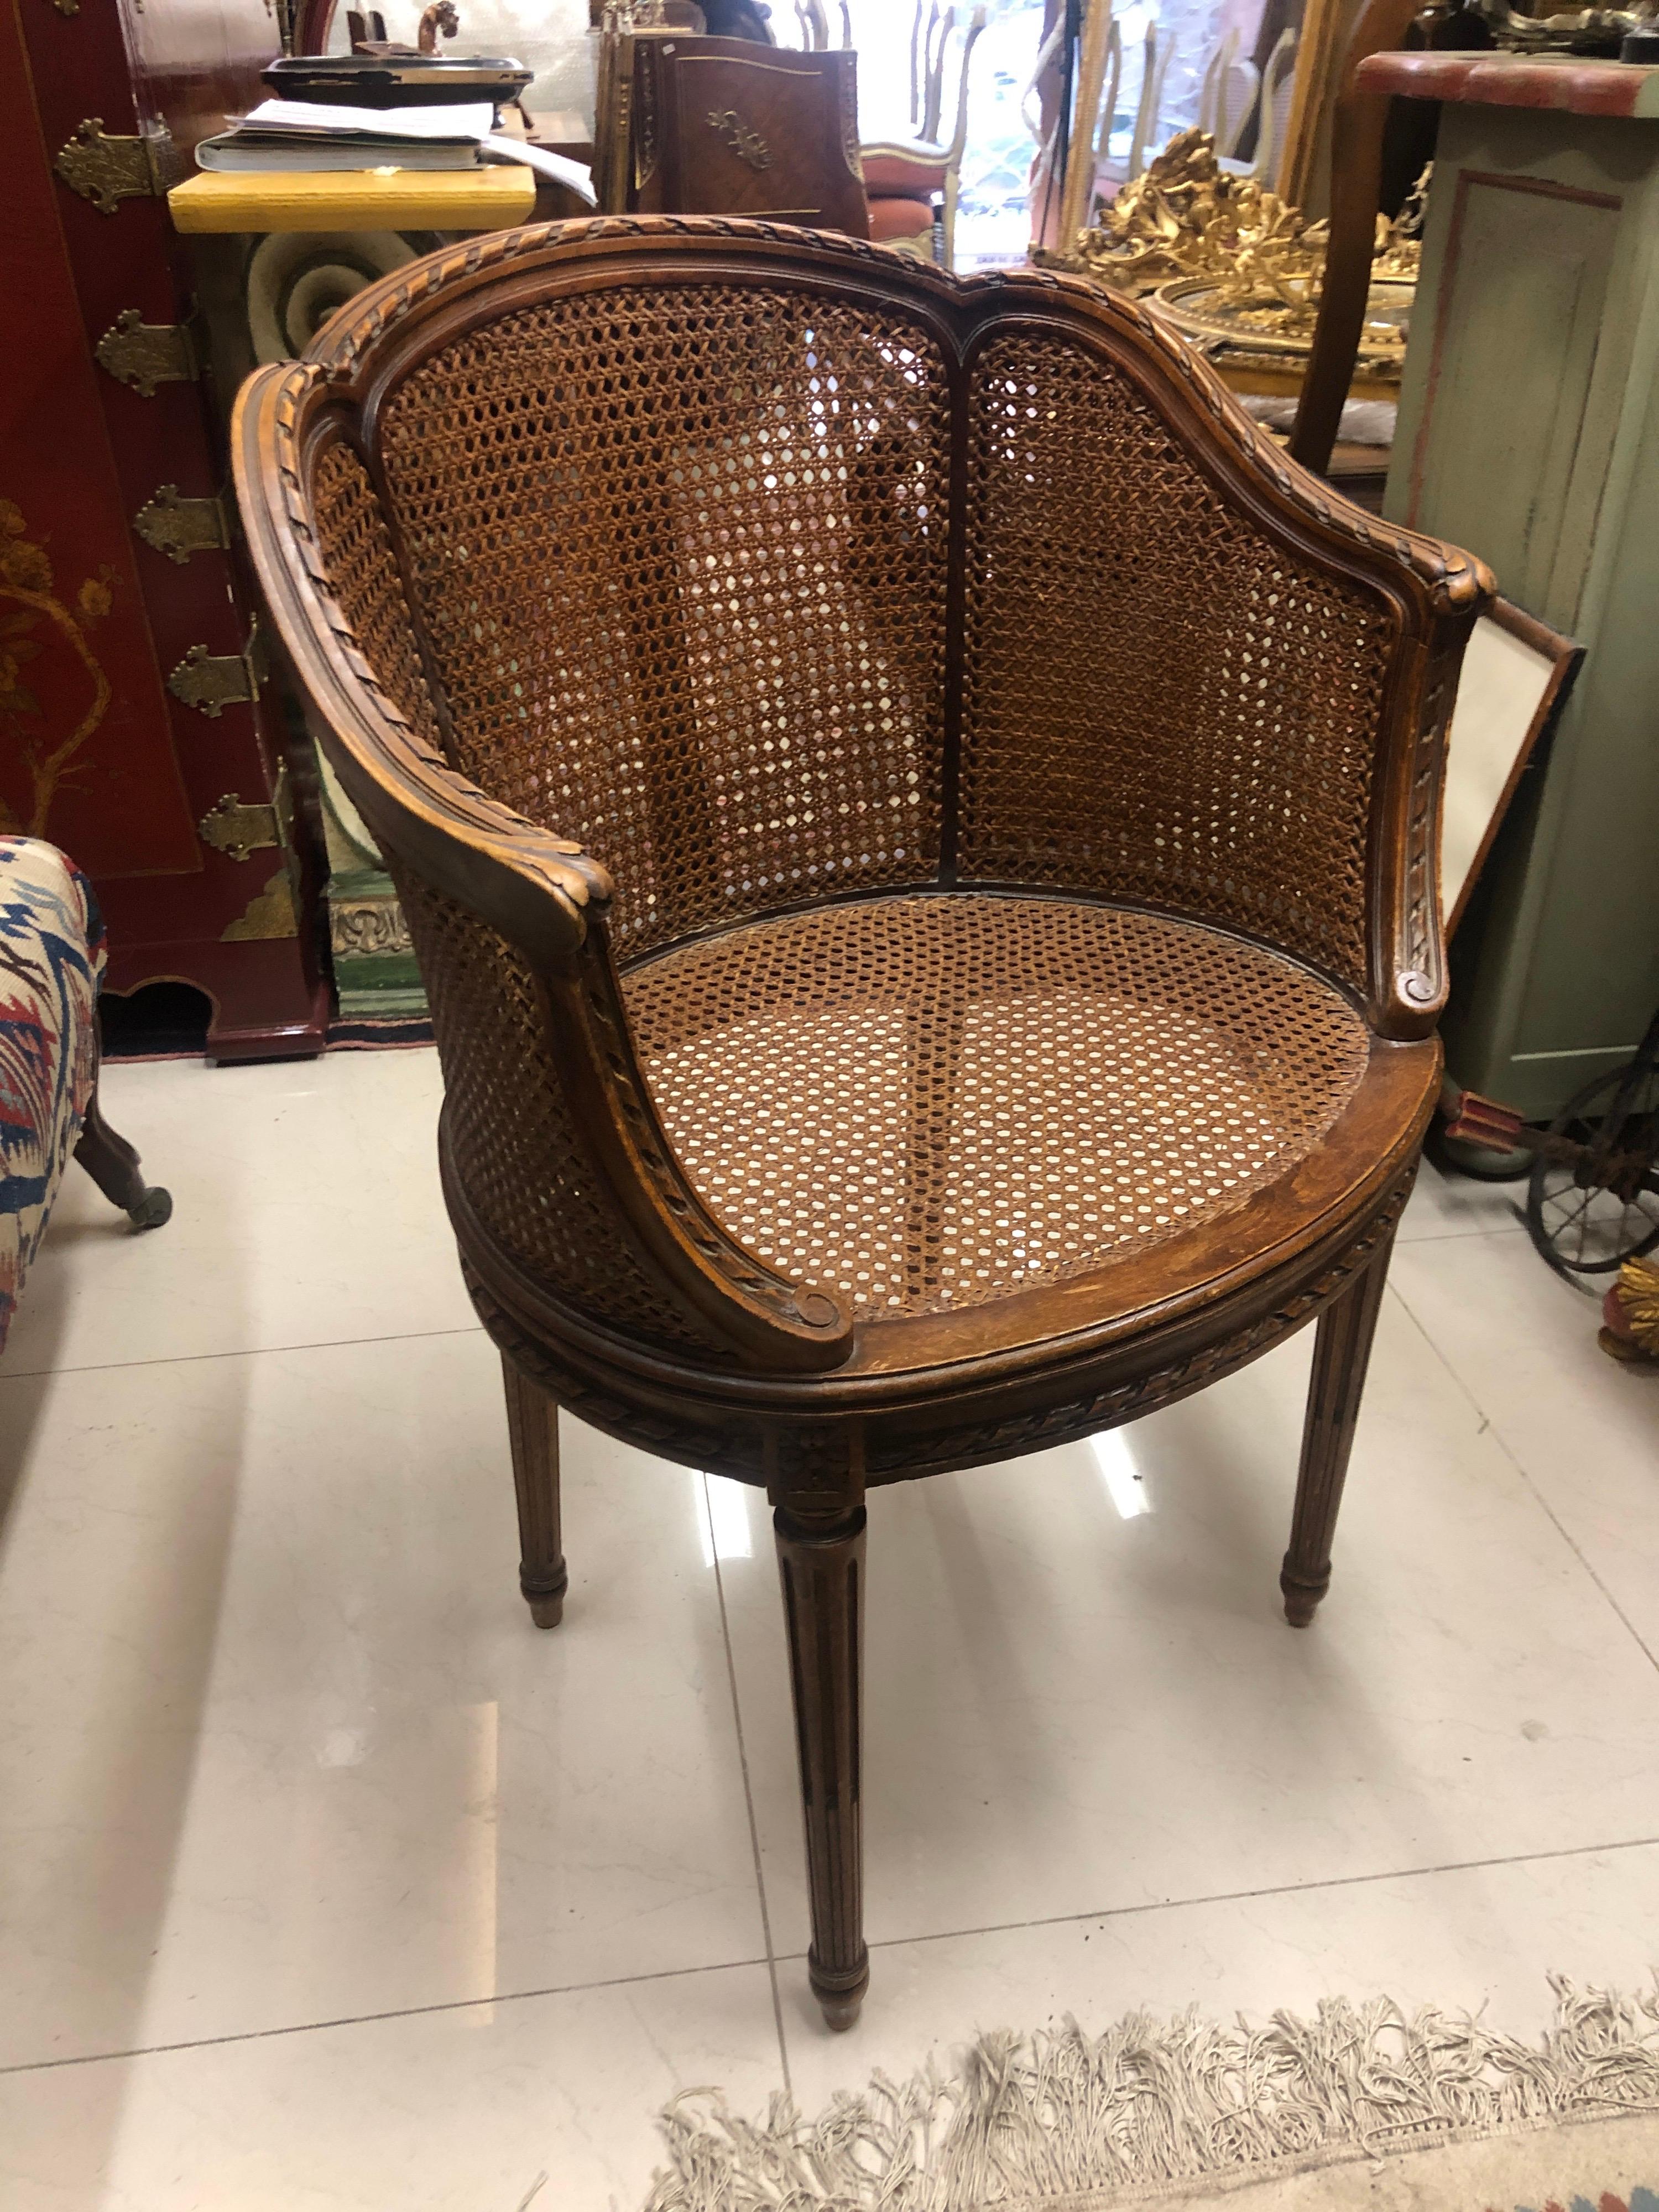 Petite French round armchair, in Louis XVI style hand carved and decorated with friezes of ribbons tapered fluted base, with dobble cane back and the seat. Very good condition. Still wearing the original label under the seat 